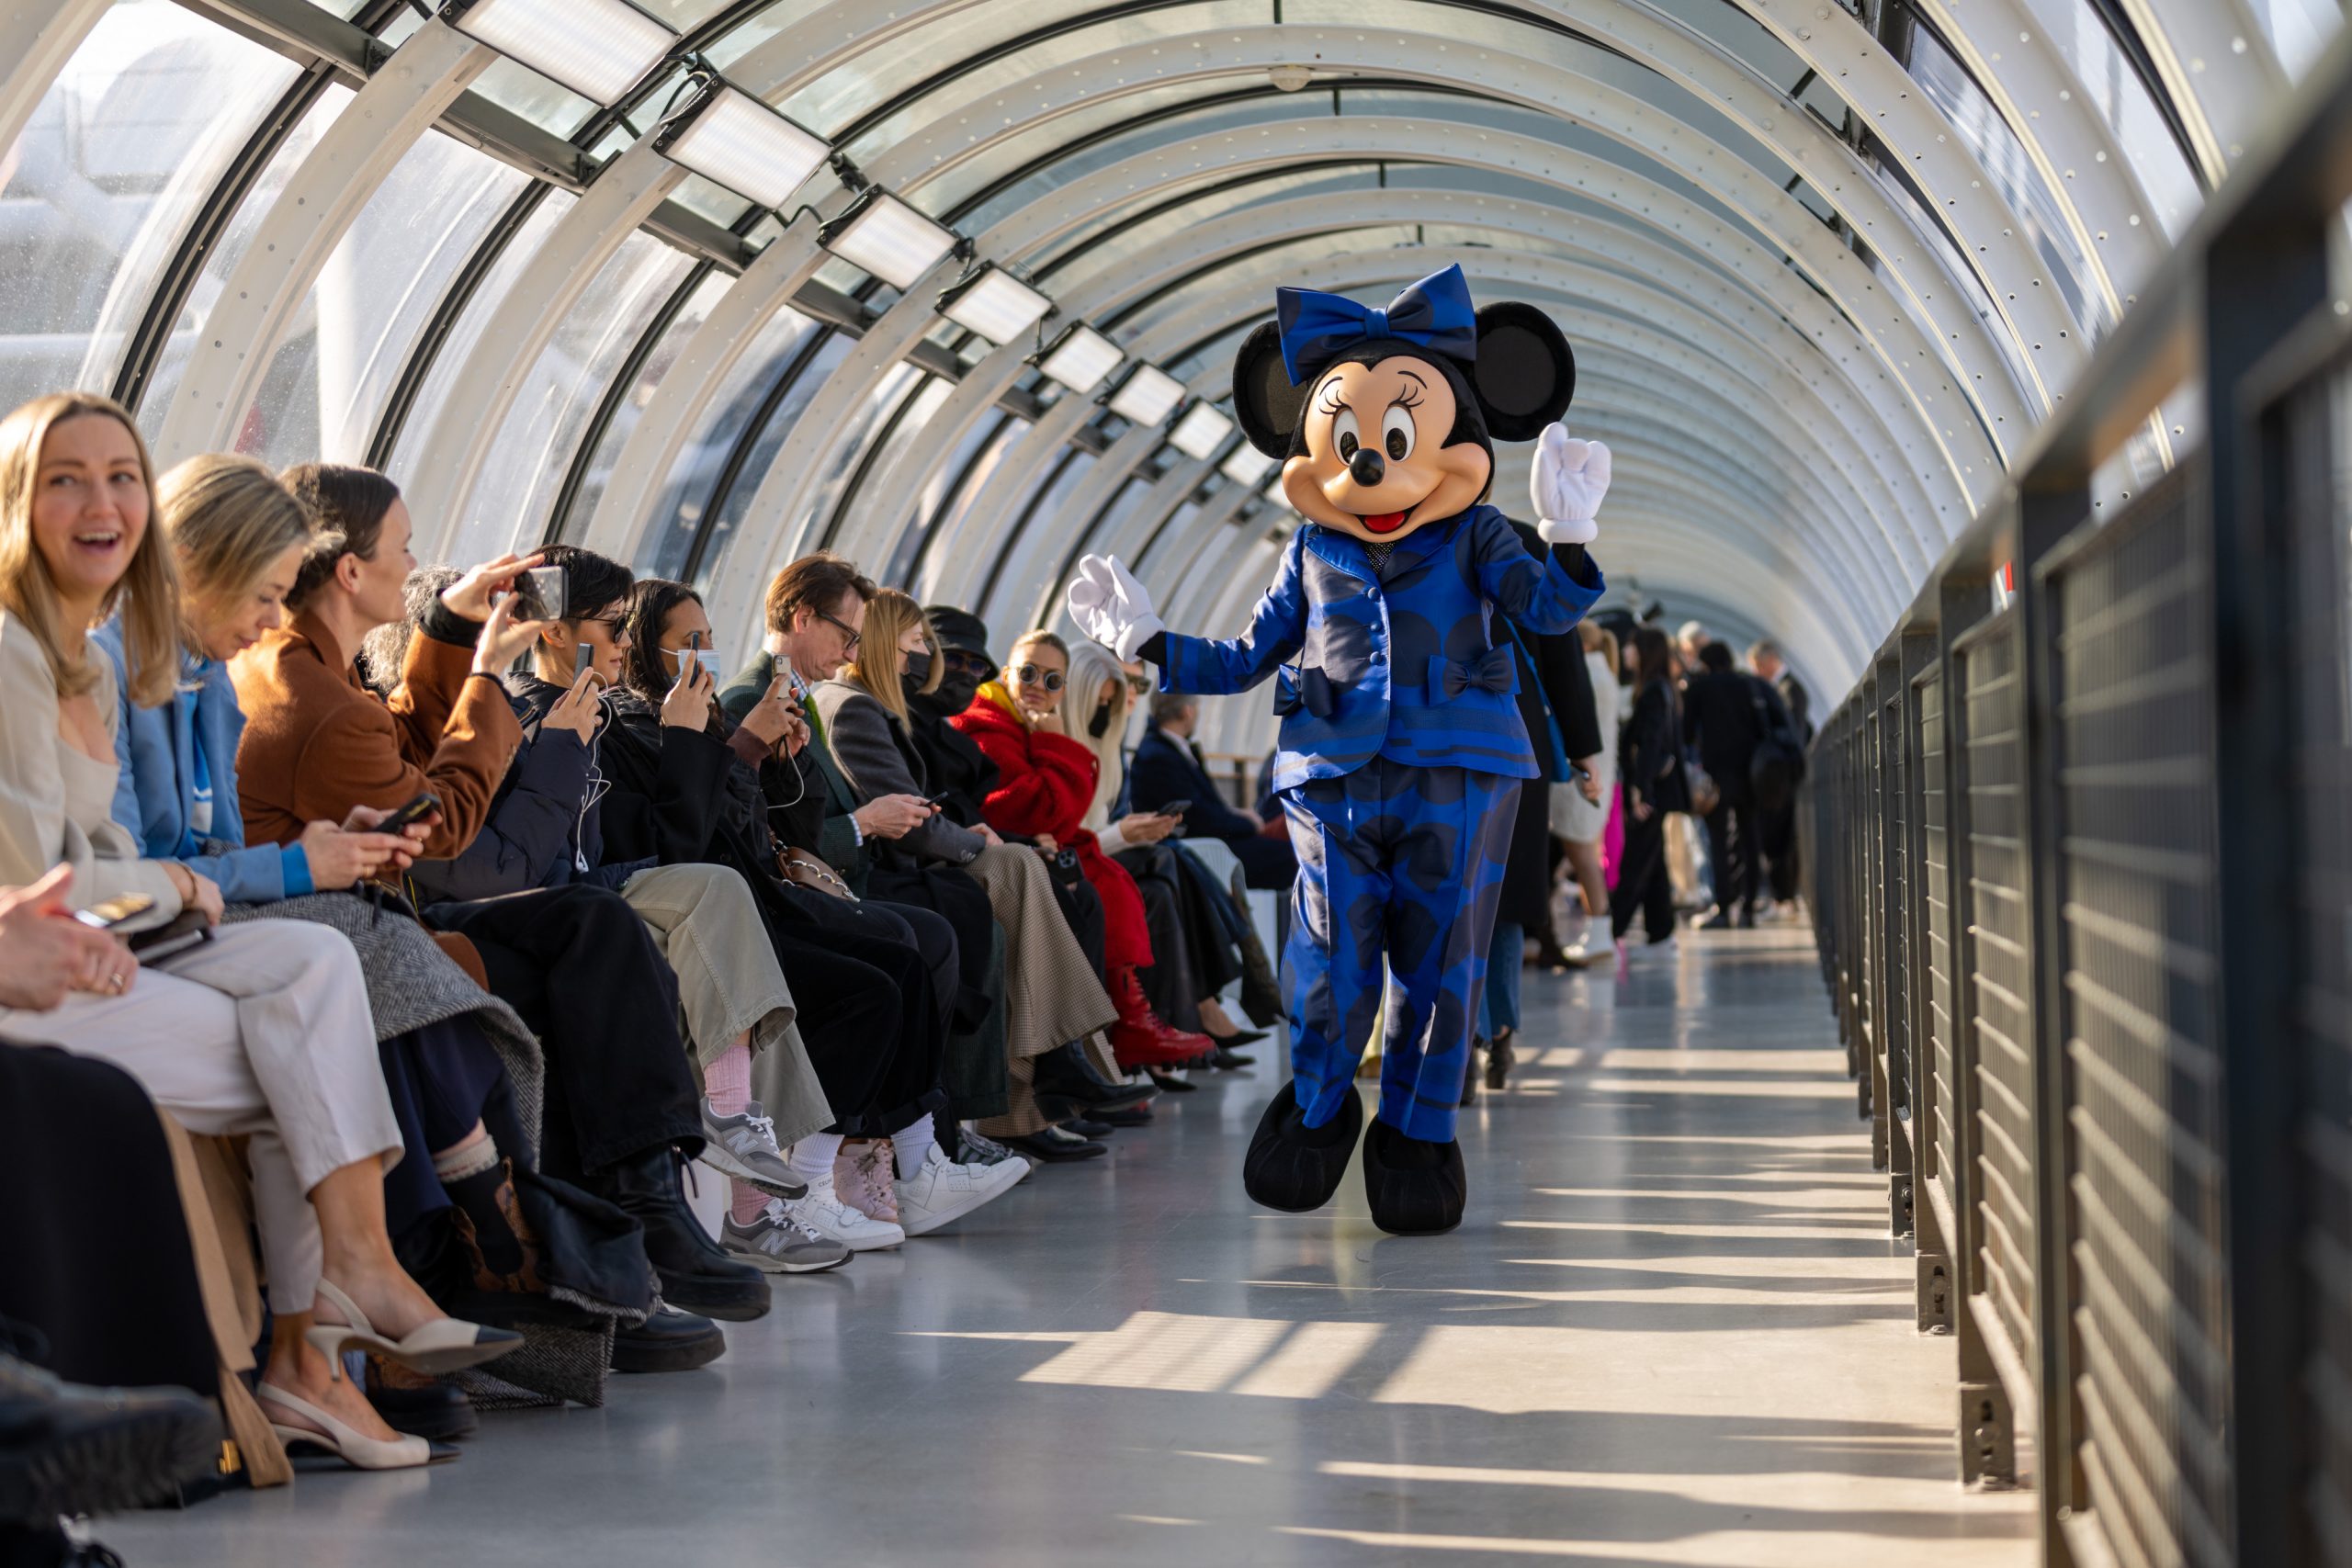 MINNIE MOUSE’S NEW PANTSUIT, DESIGNED BY STELLA MCCARTNEY